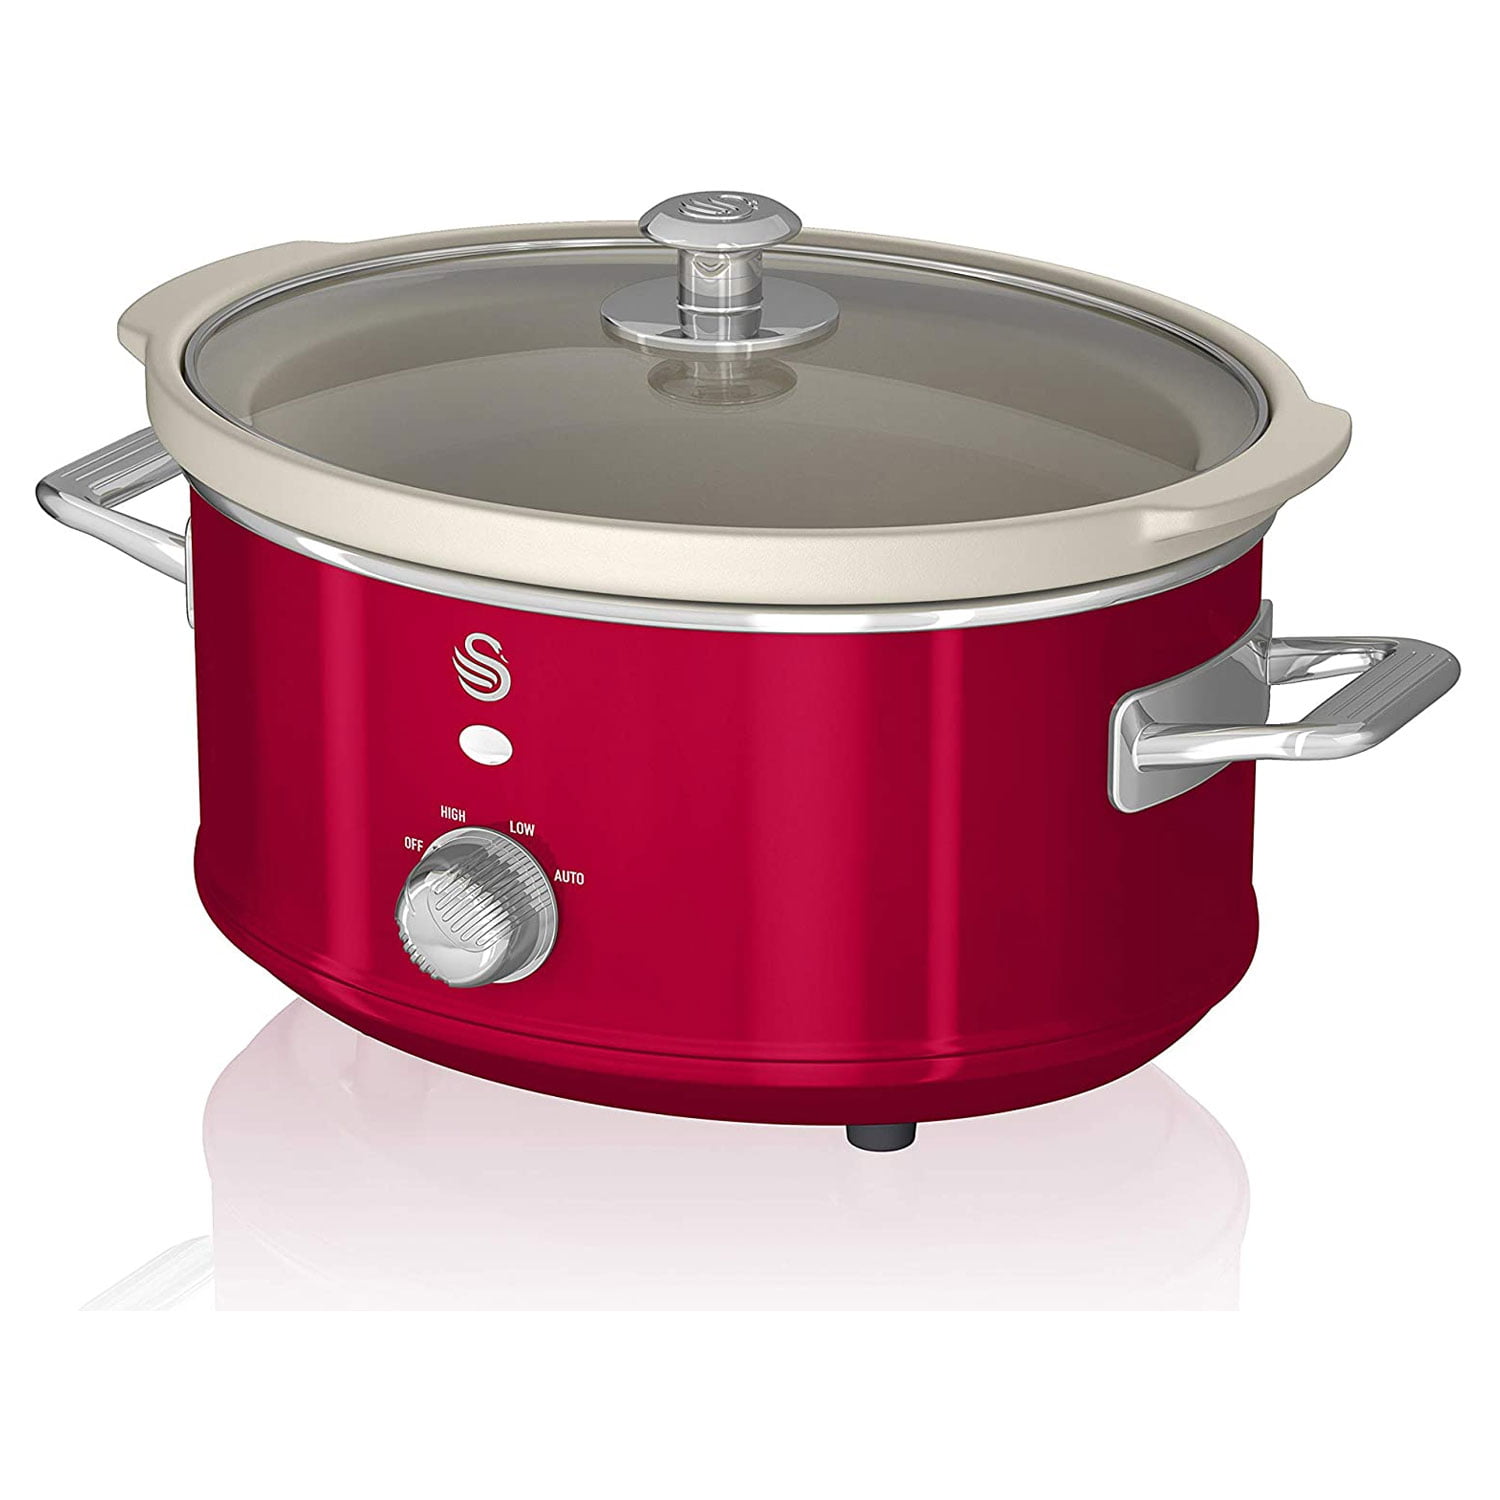 Swan 3.5L Slow Cooker, SF17021RN, Red